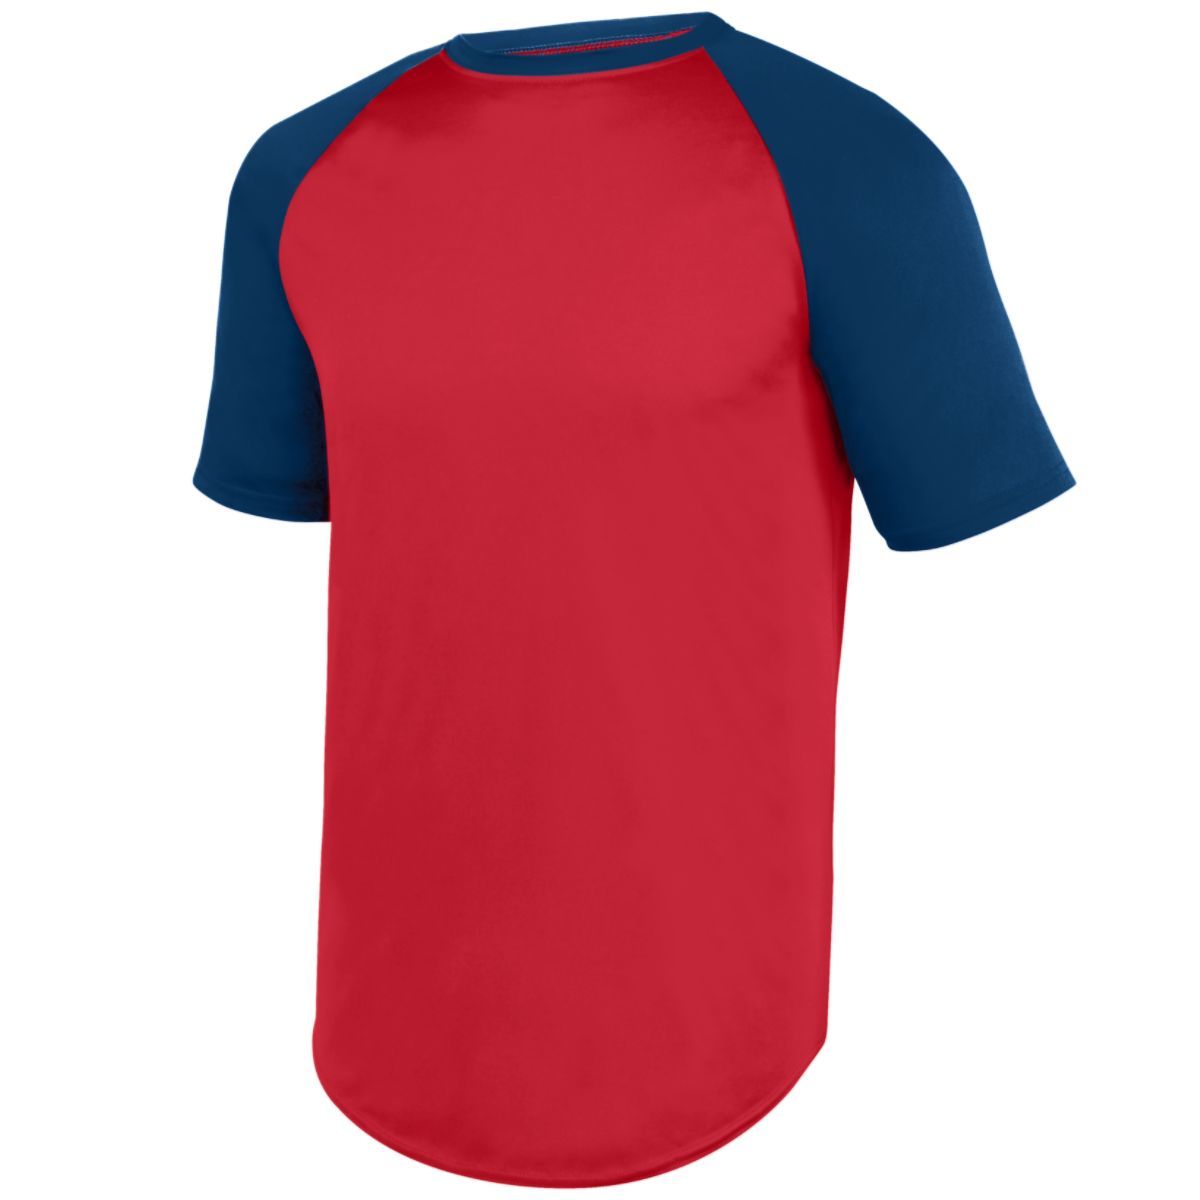 Augusta Sportswear Youth Wicking Short Sleeve Baseball Jersey in Red/Navy  -Part of the Youth, Youth-Jersey, Augusta-Products, Baseball, Shirts, All-Sports, All-Sports-1 product lines at KanaleyCreations.com